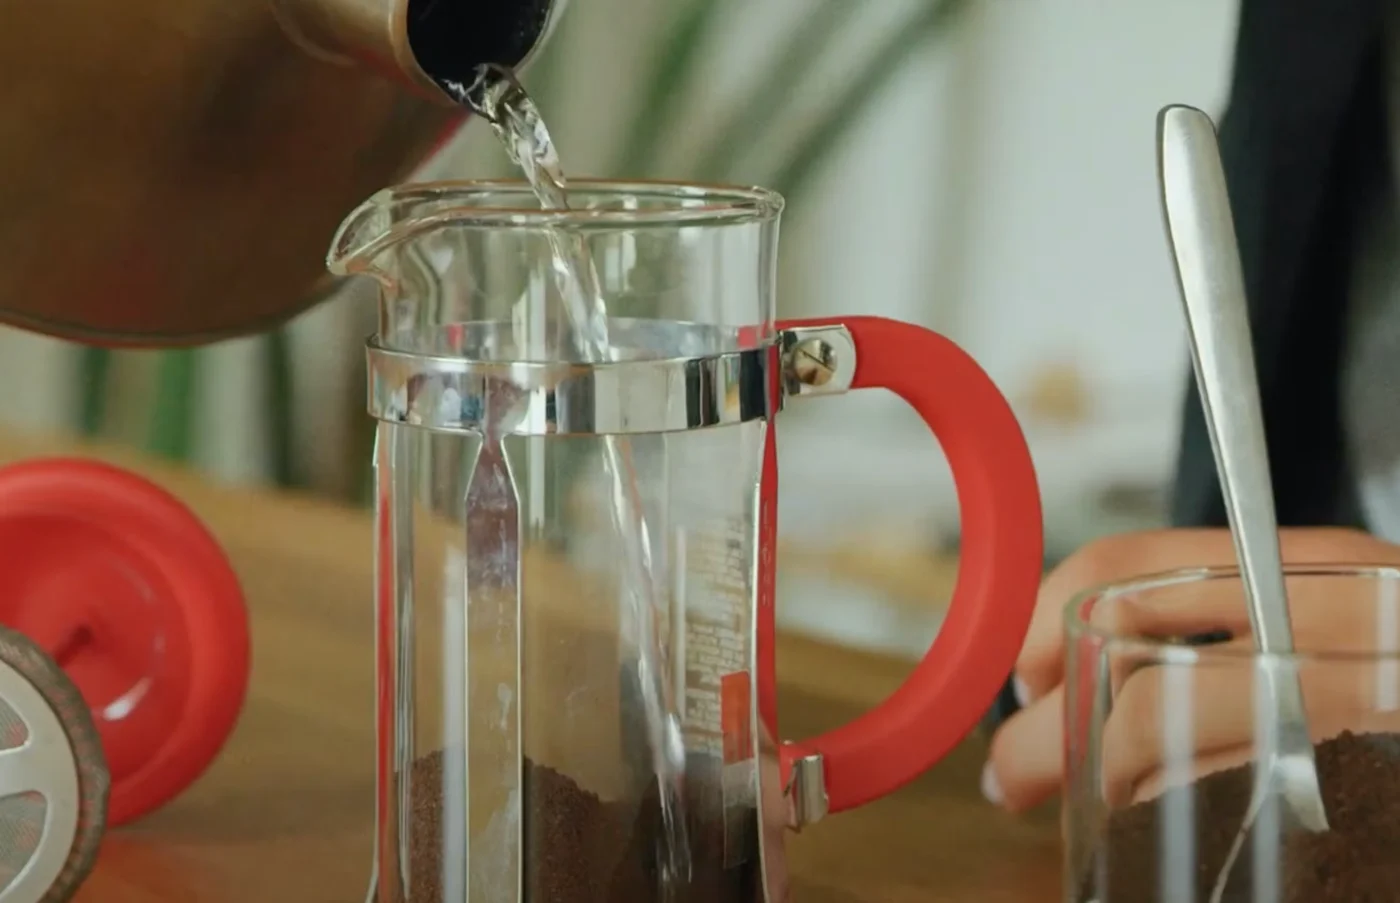 Pouring water into a french press